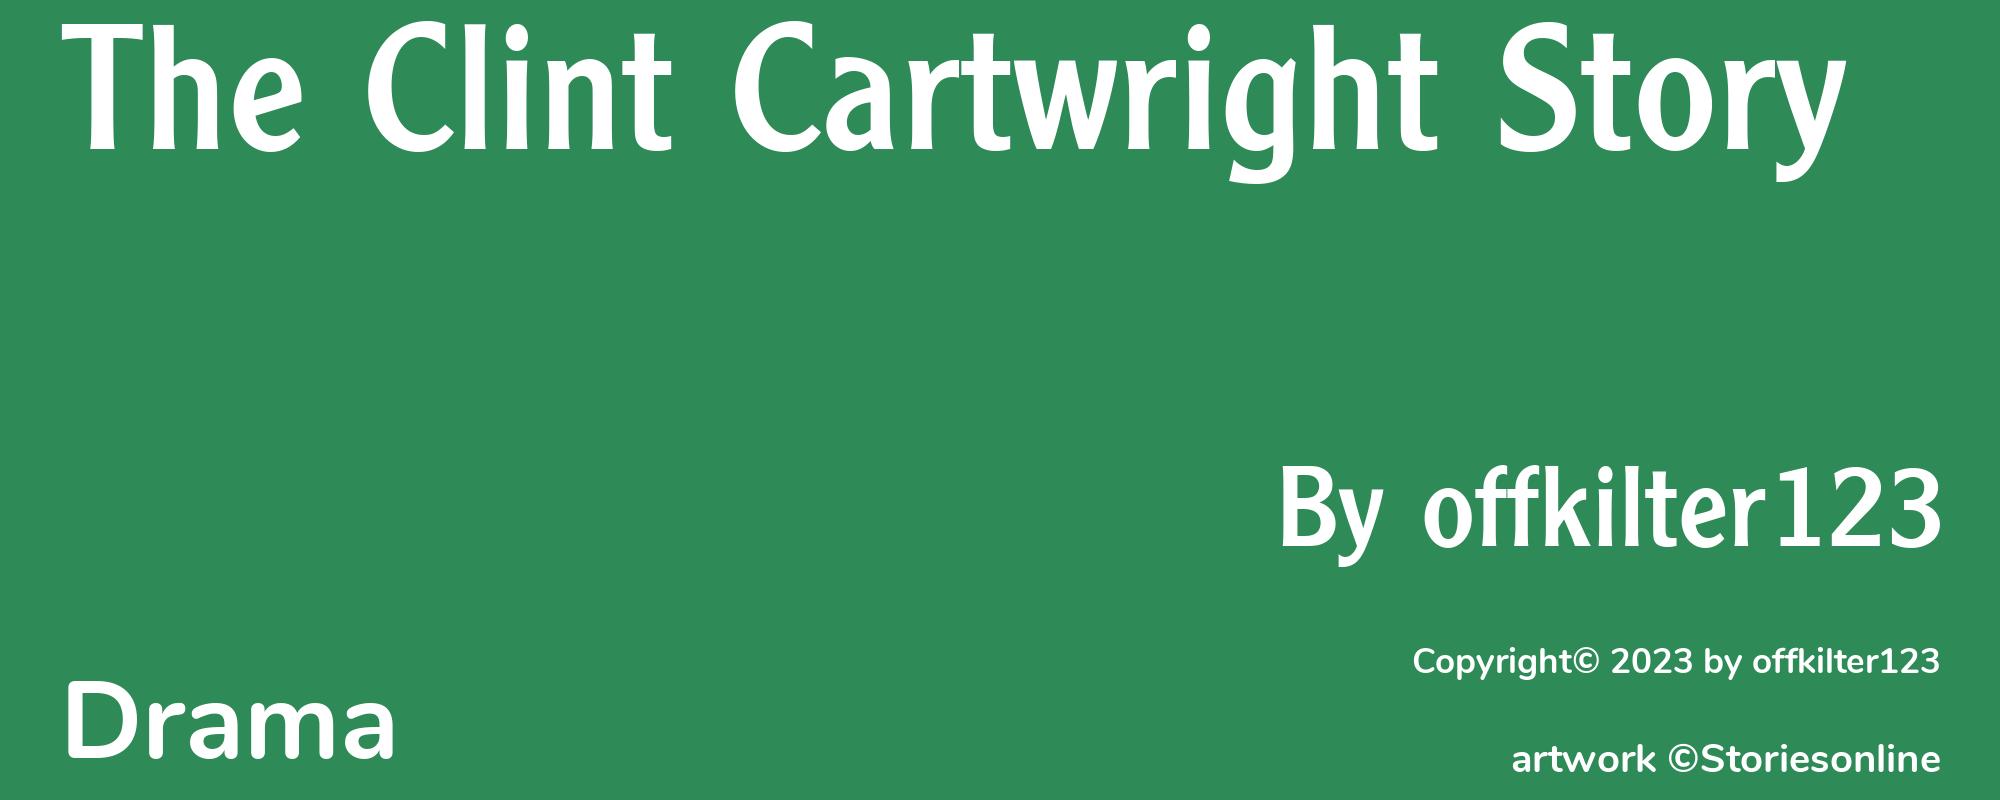 The Clint Cartwright Story - Cover